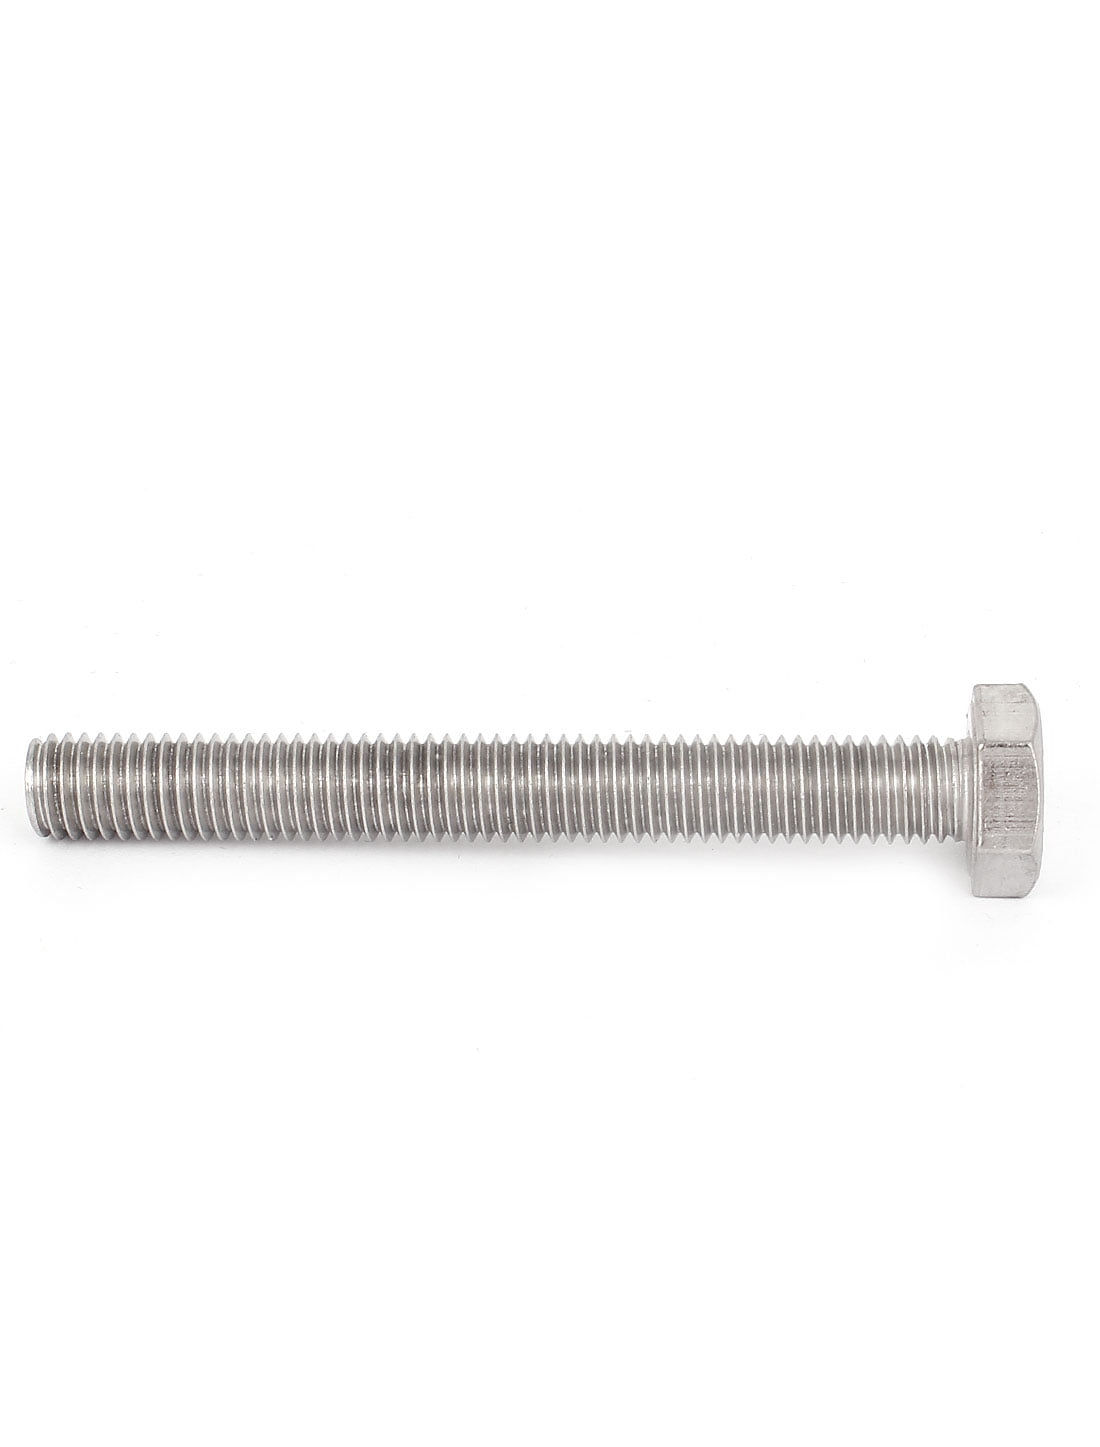 uxcell M10 x 85mm A2 Stainless Steel Fully Threaded Hex Head Screw Bolt 5 Pcs a15032700ux0060